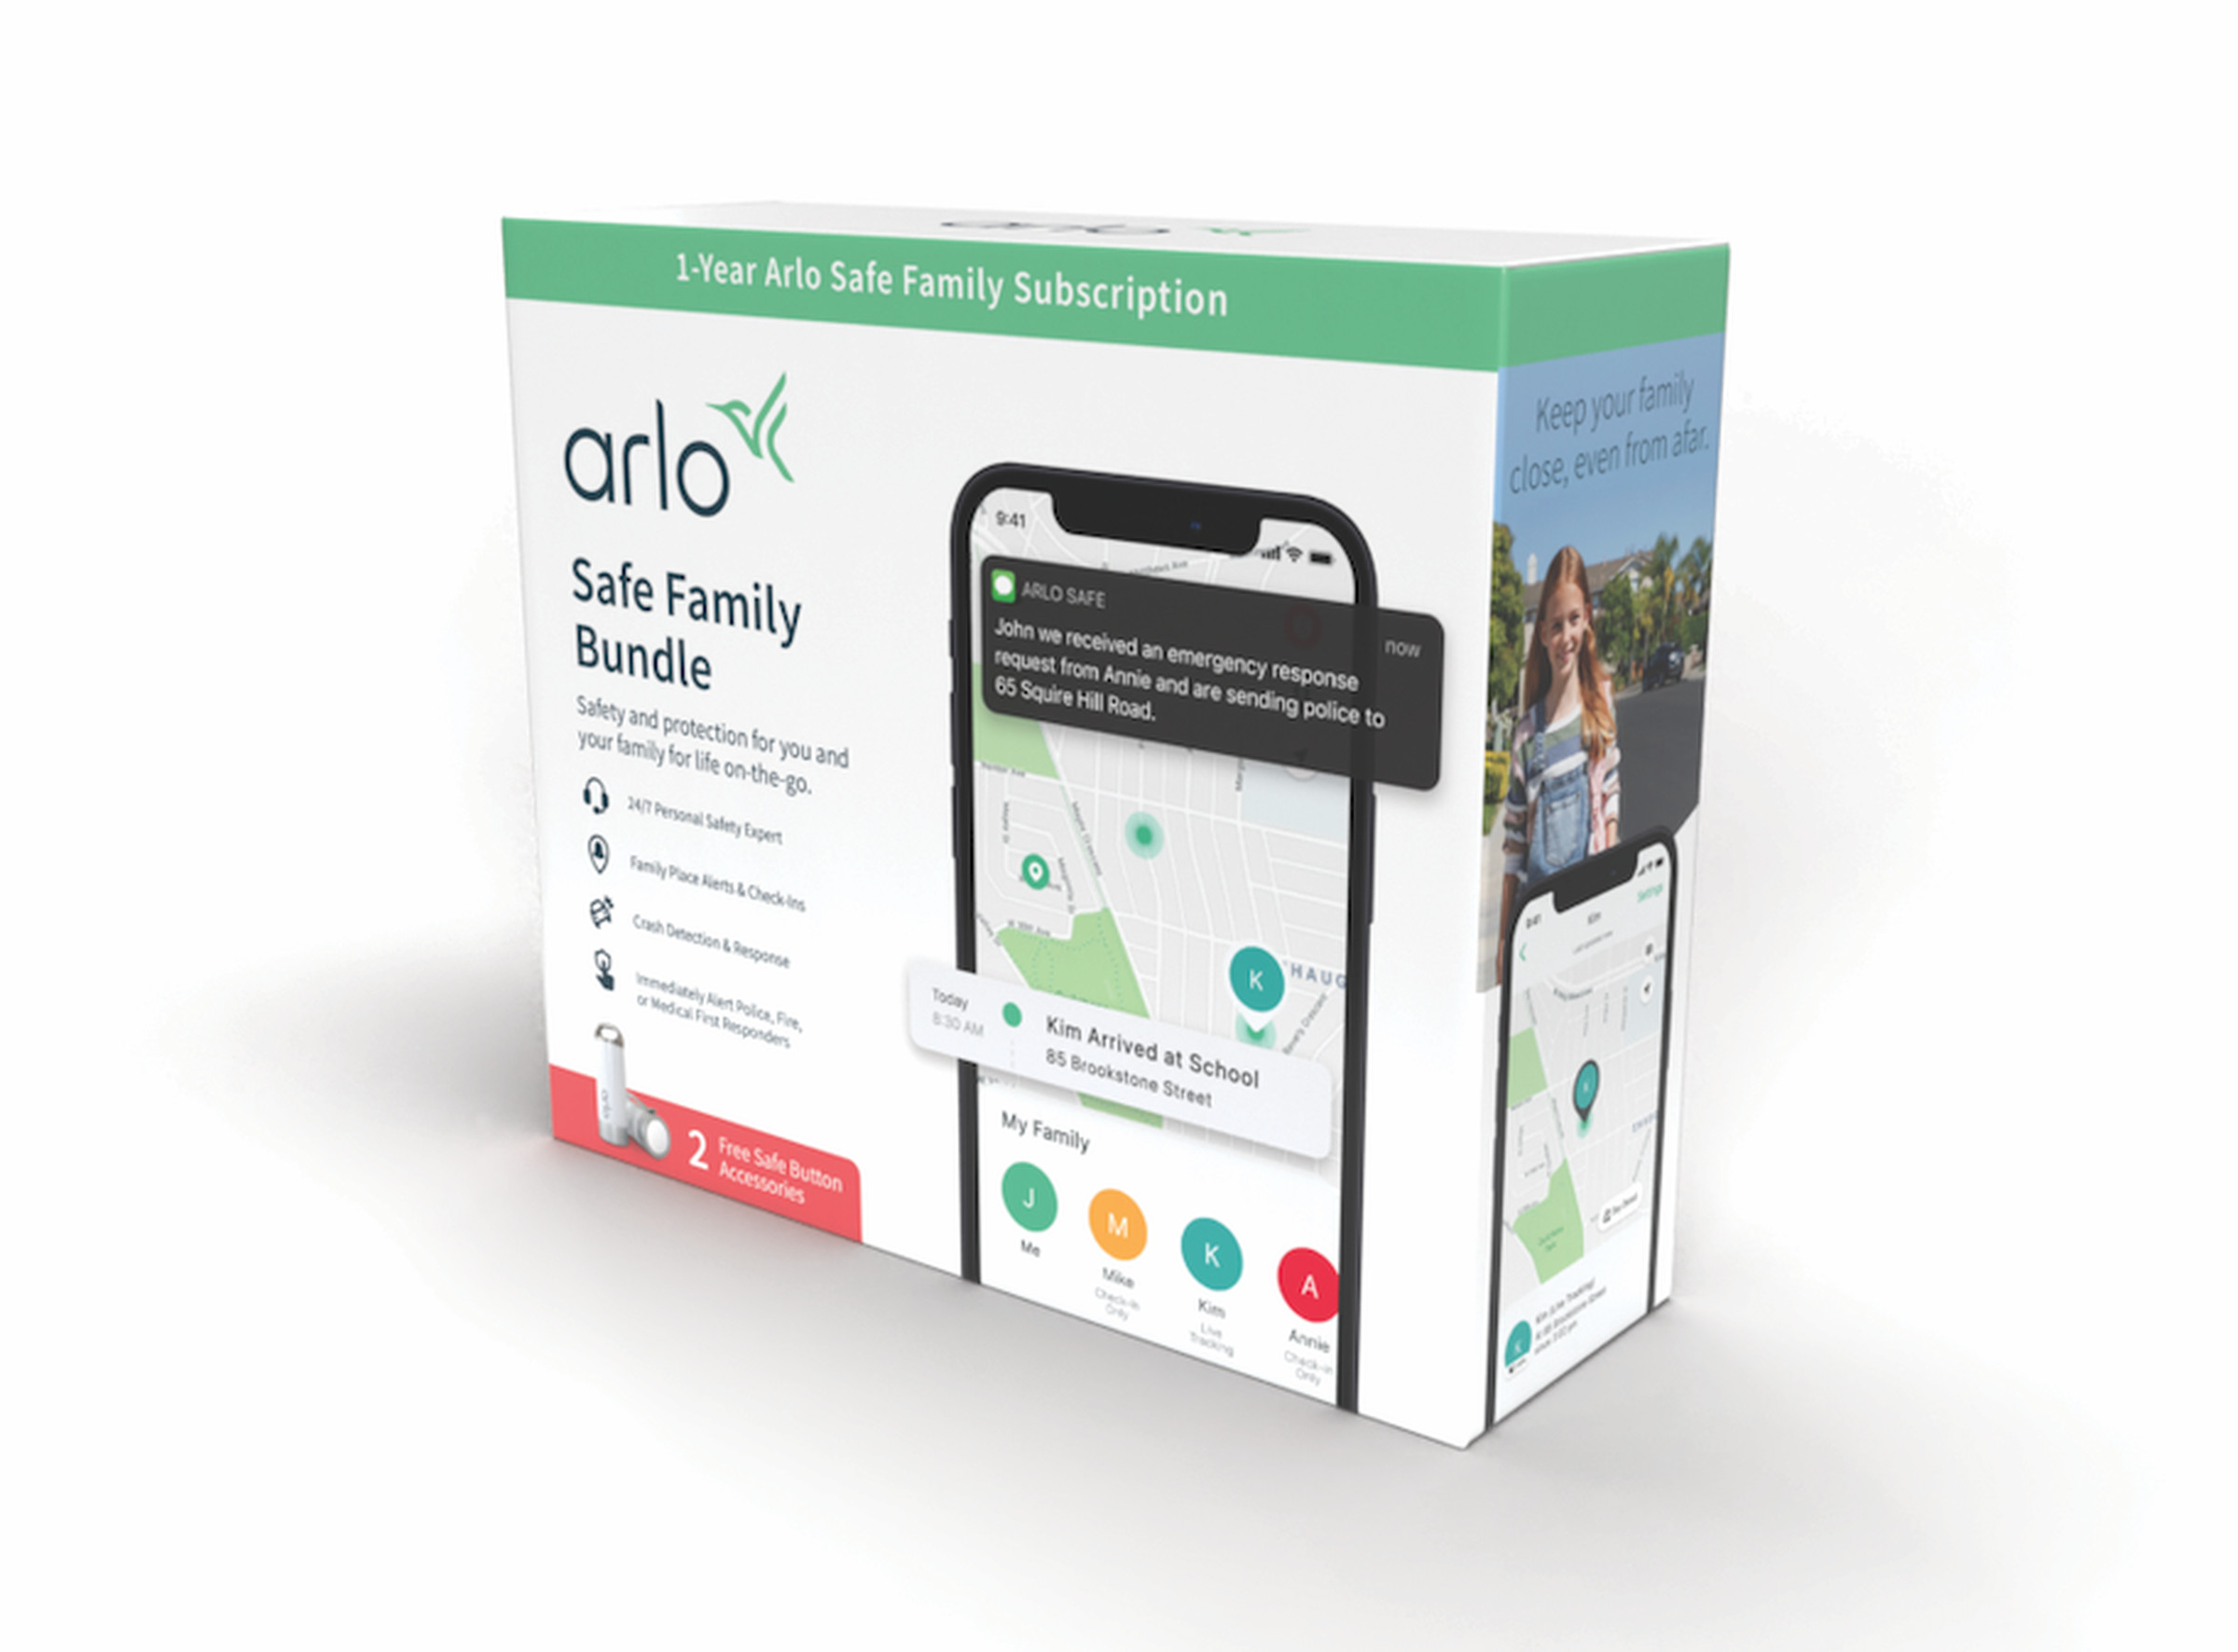 A boxed bundle that includes two of the Arlo Safe buttons and a year subscription is available at Best Buy for $119.99.